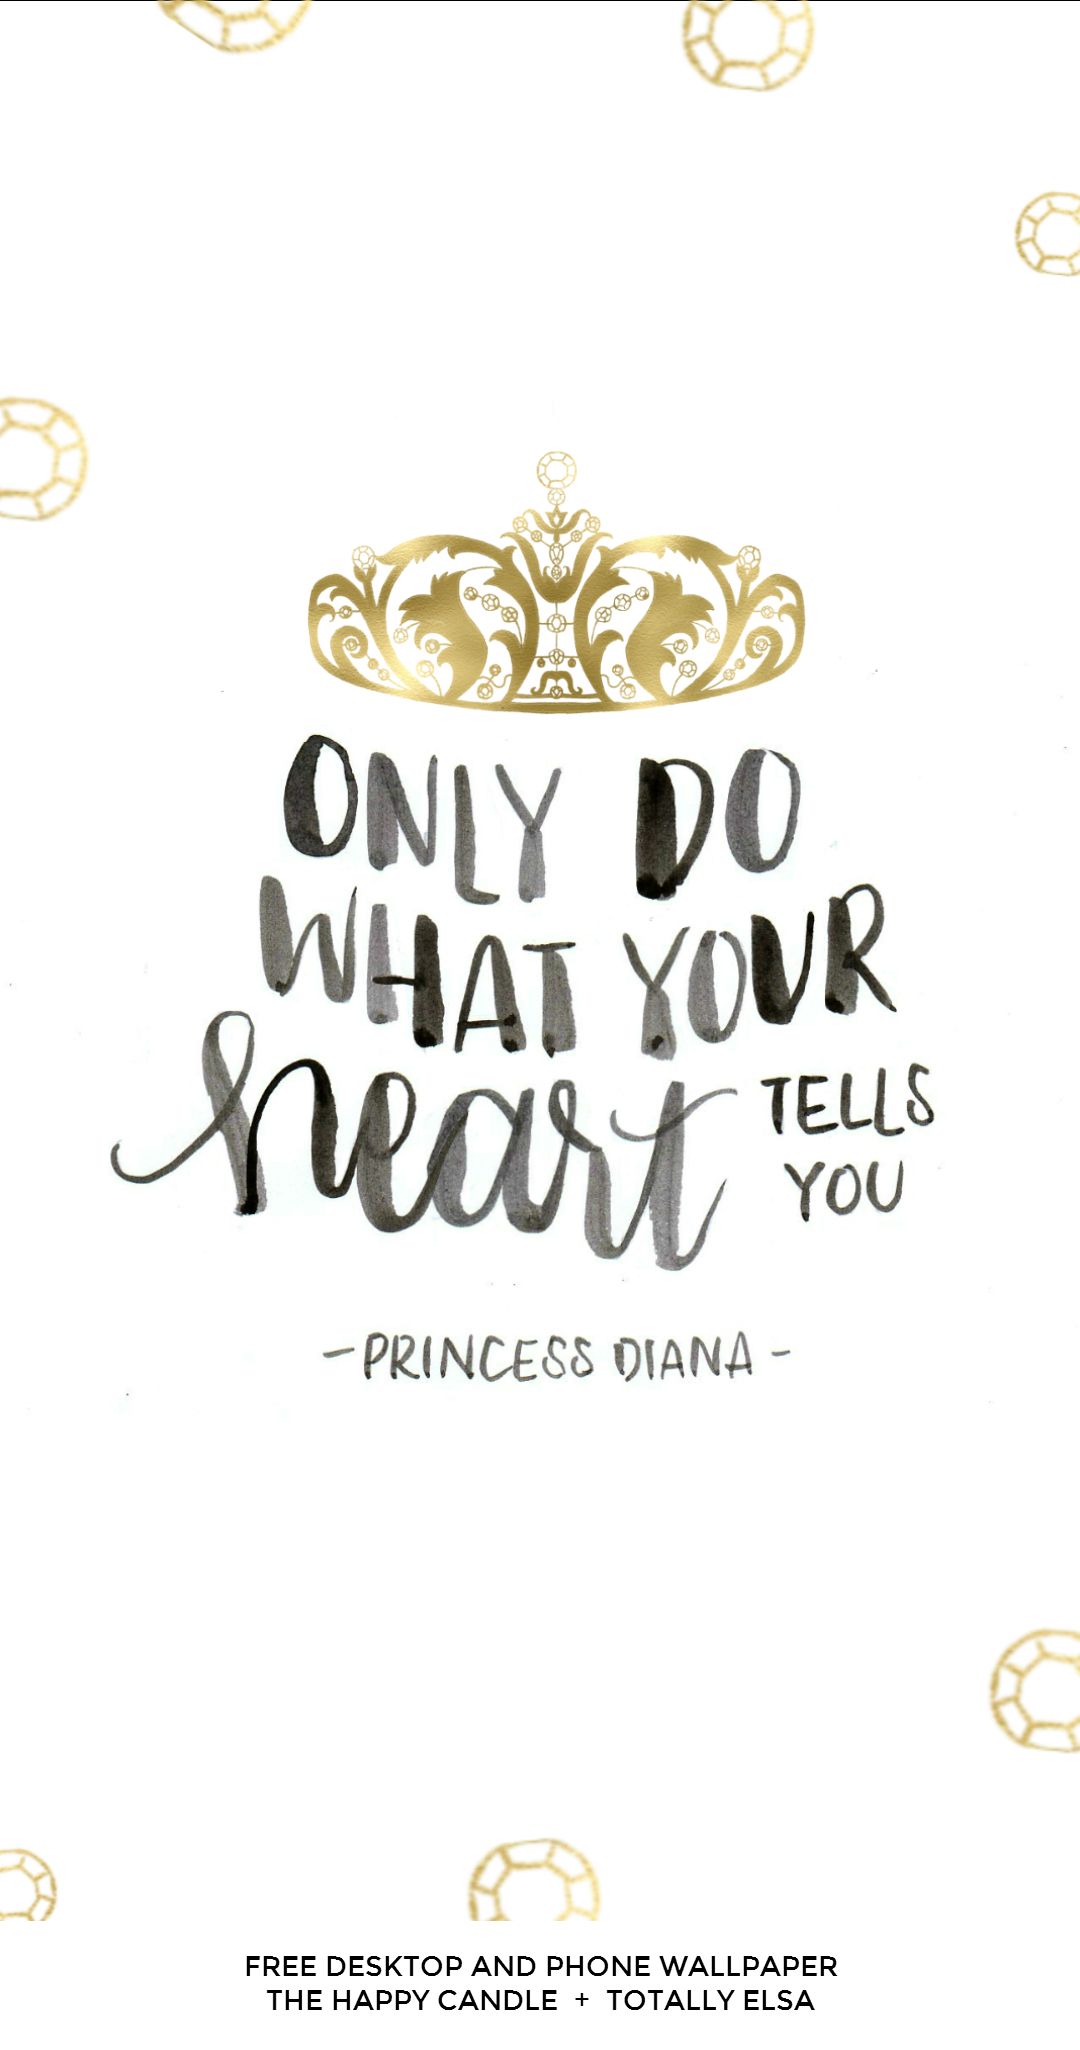 Desktop And Phone Wallpaper With A Quote From Princess Diana